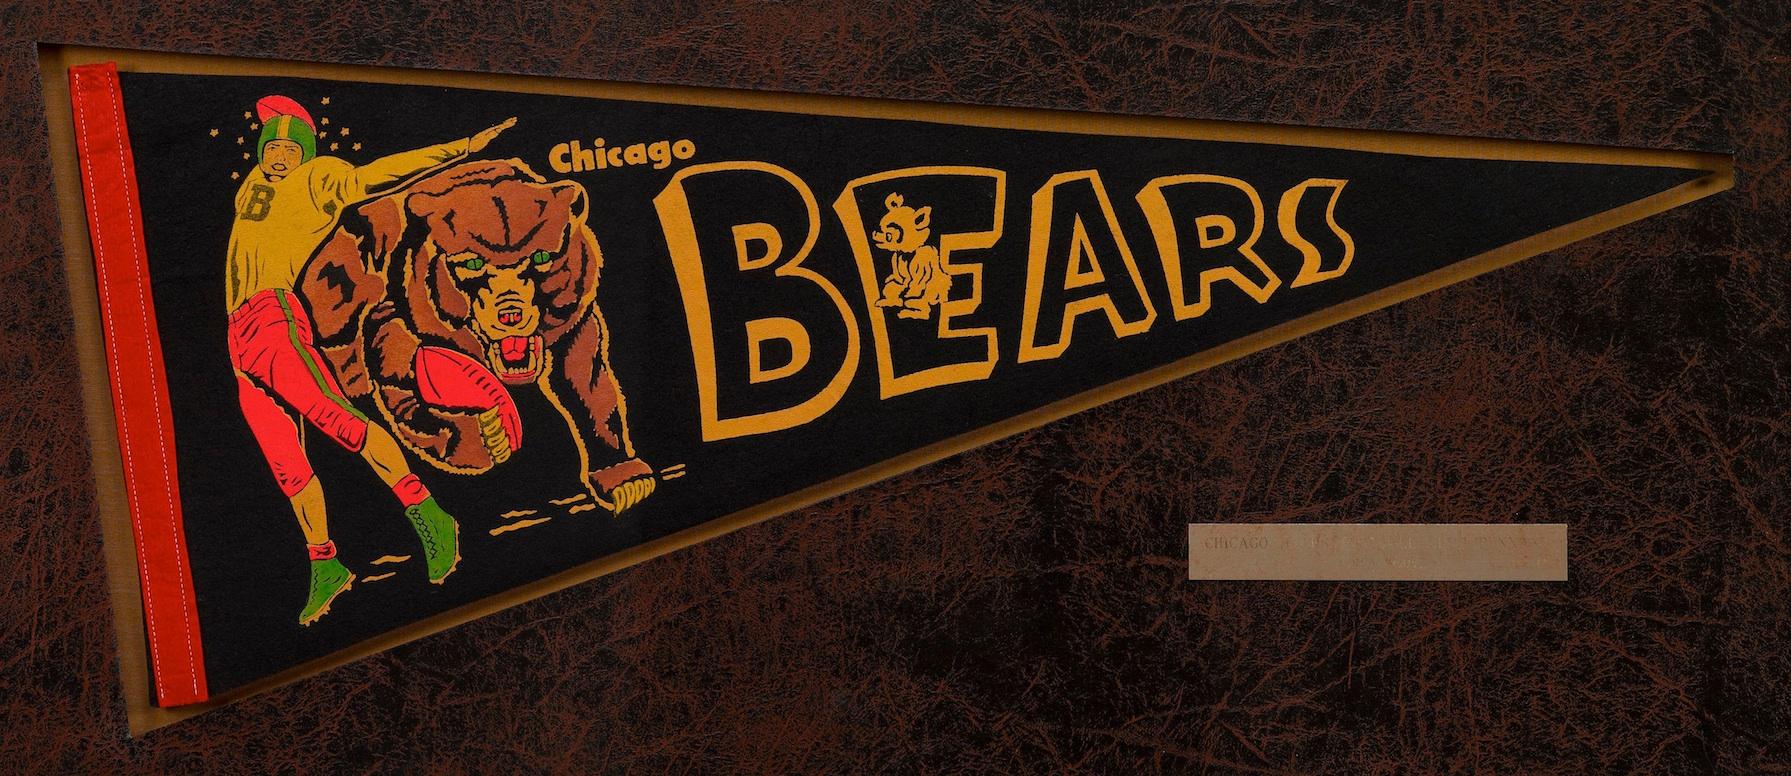 Presented is an original Chicago Bears football pennant, circa 1950. This felt pennant clearly portrays the team name Bears in yellow block lettering. A team member is pictured on the left and appears to be pushed aside from a bear that rushes